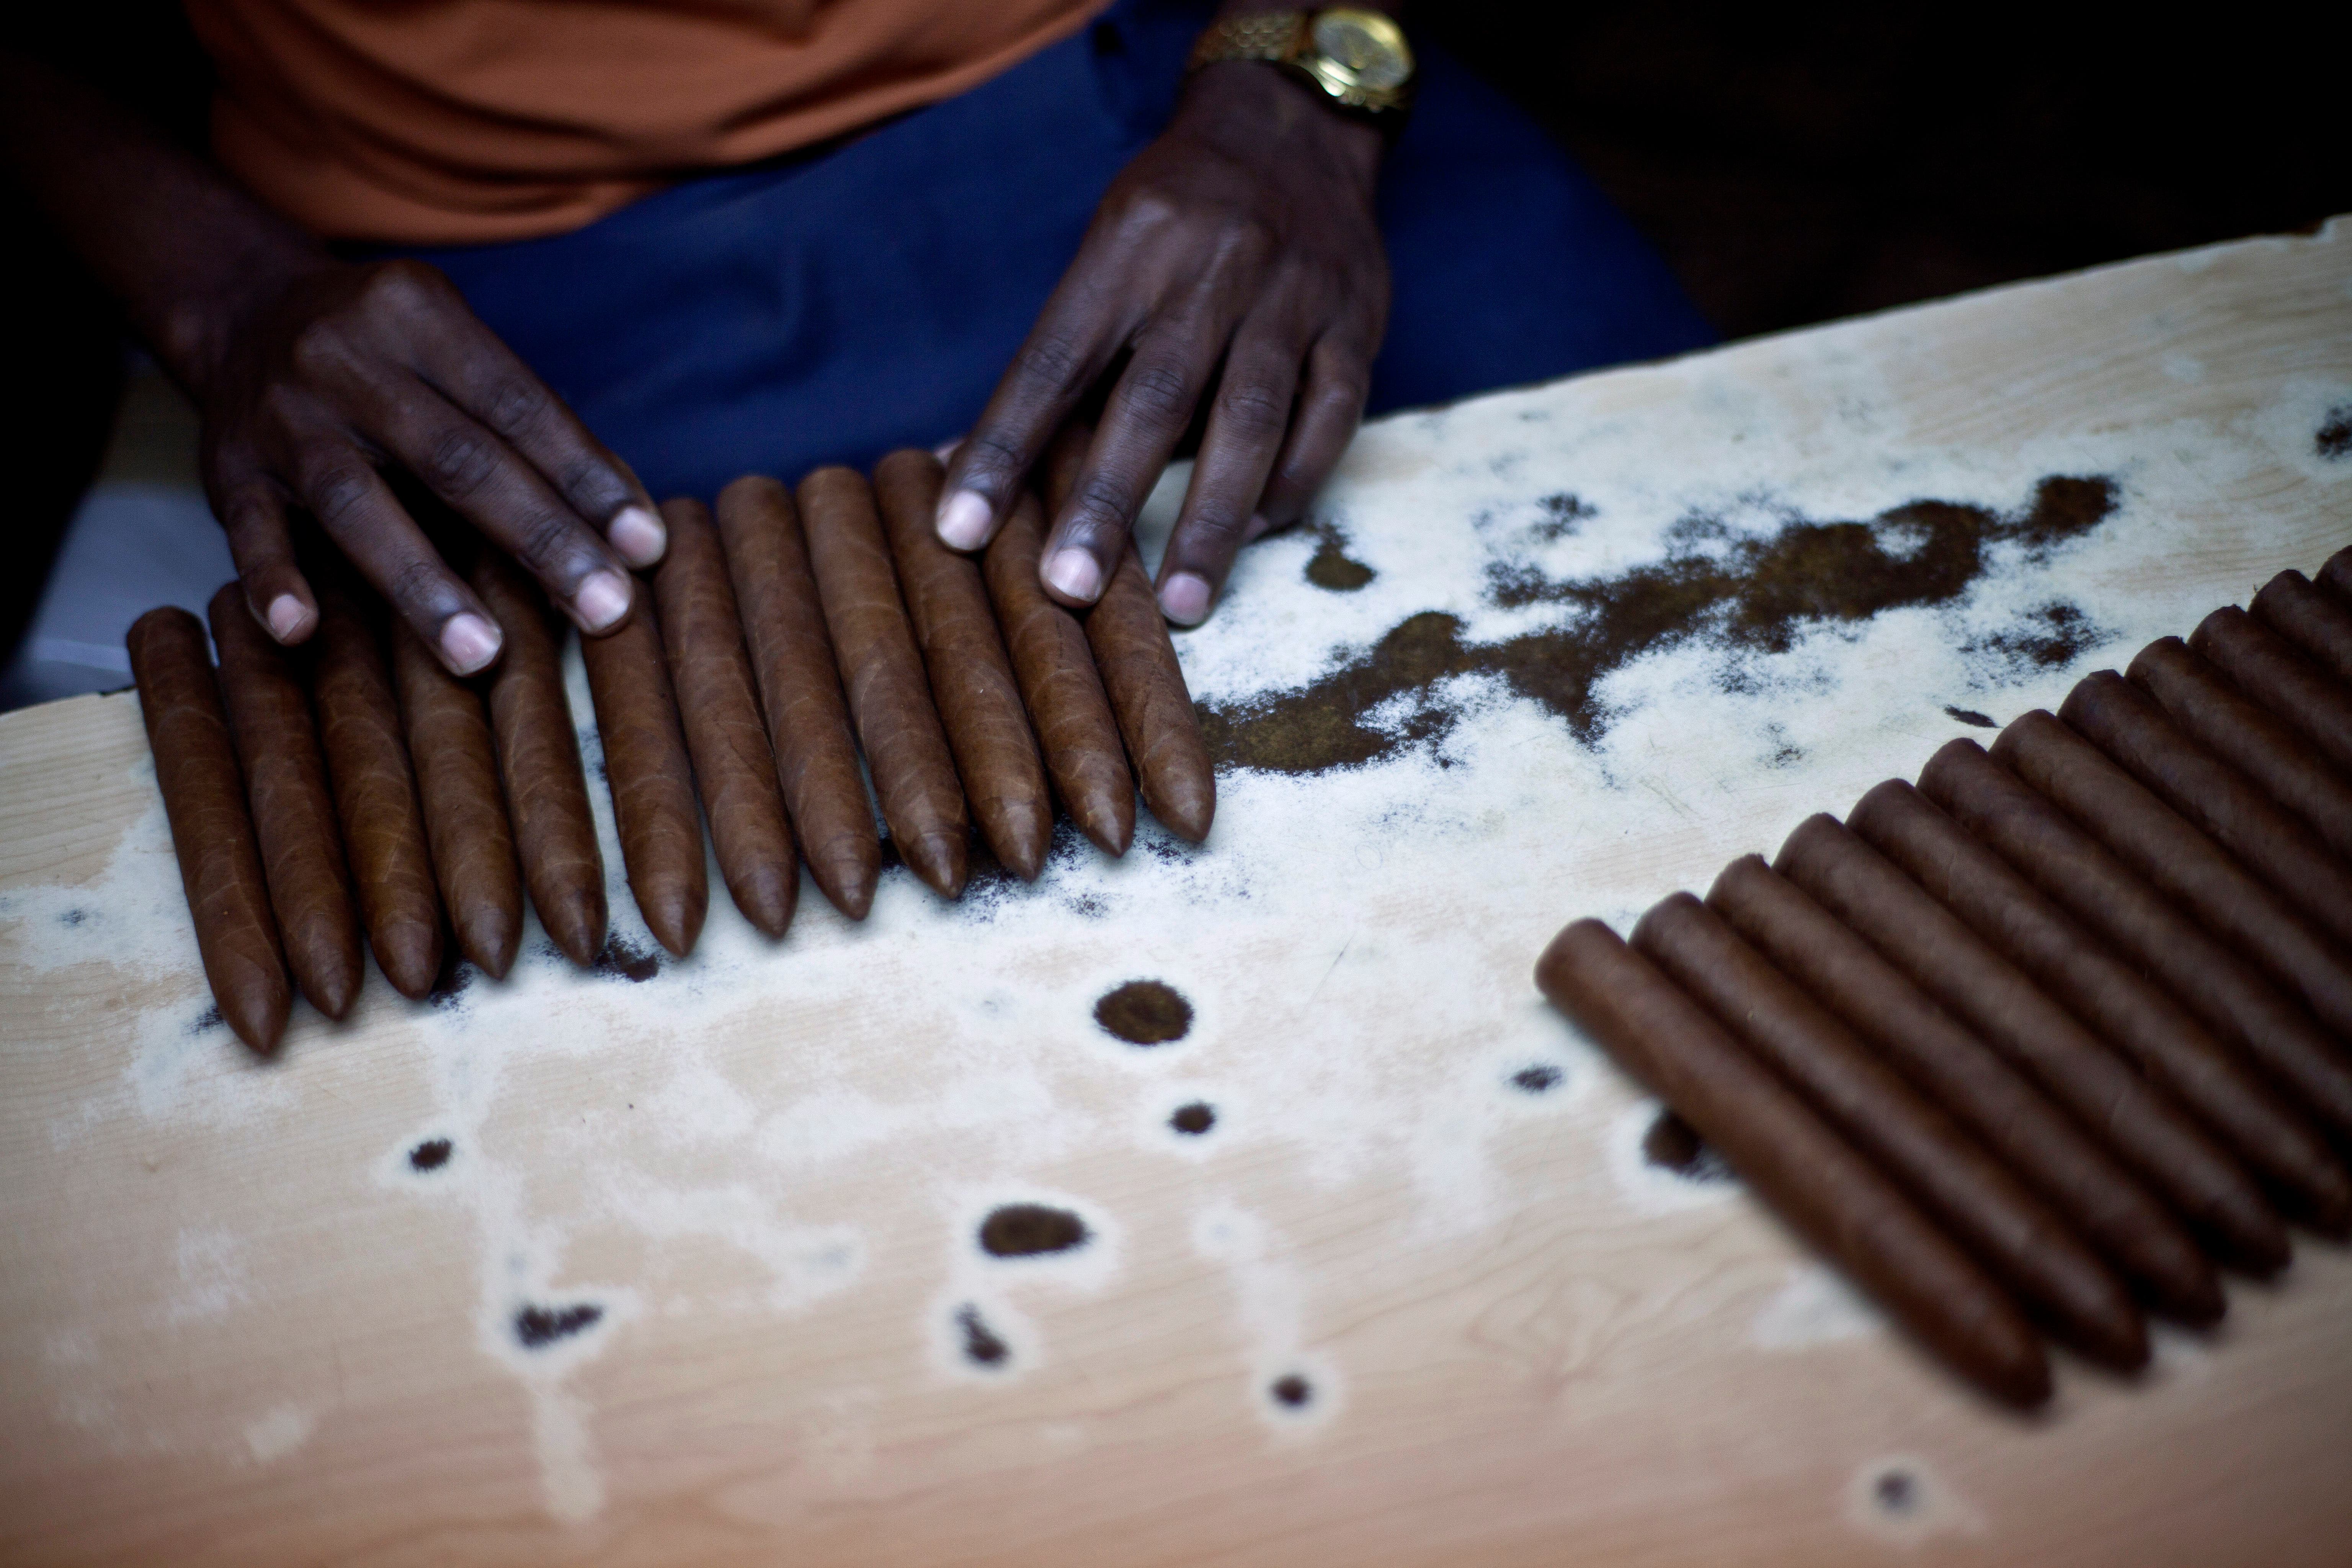 A worker selects cigars at the H. Upmann cigar factory, where people can take tours as part of the 15th annual Cigar Festival, in Havana, Cuba.  (AP)